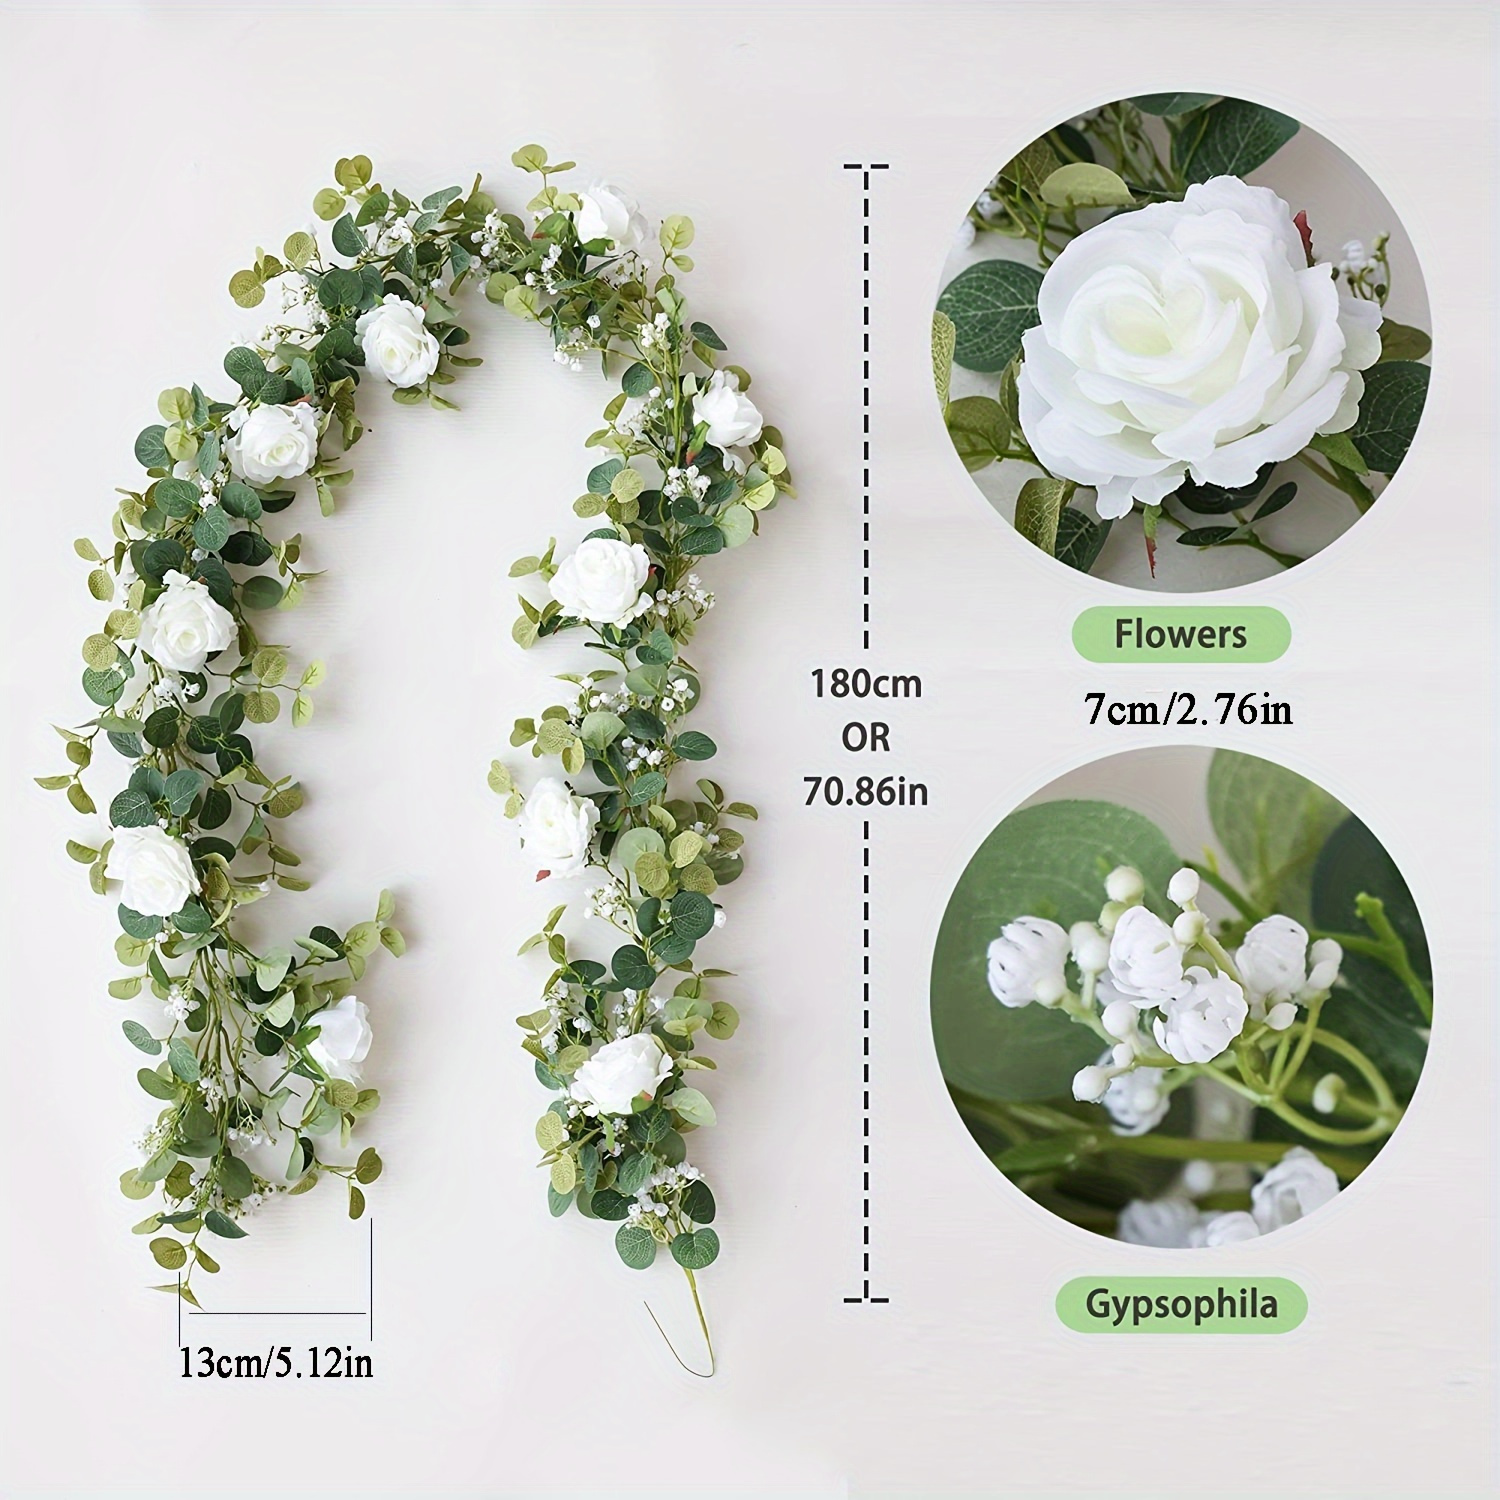 

1pc, Artificial Eucalyptus Garland With Flowers And Gypsophila - Perfect For Weddings, Home Decor, And Crafts, Indoor Outdoor Decor, Mother's Day Decor